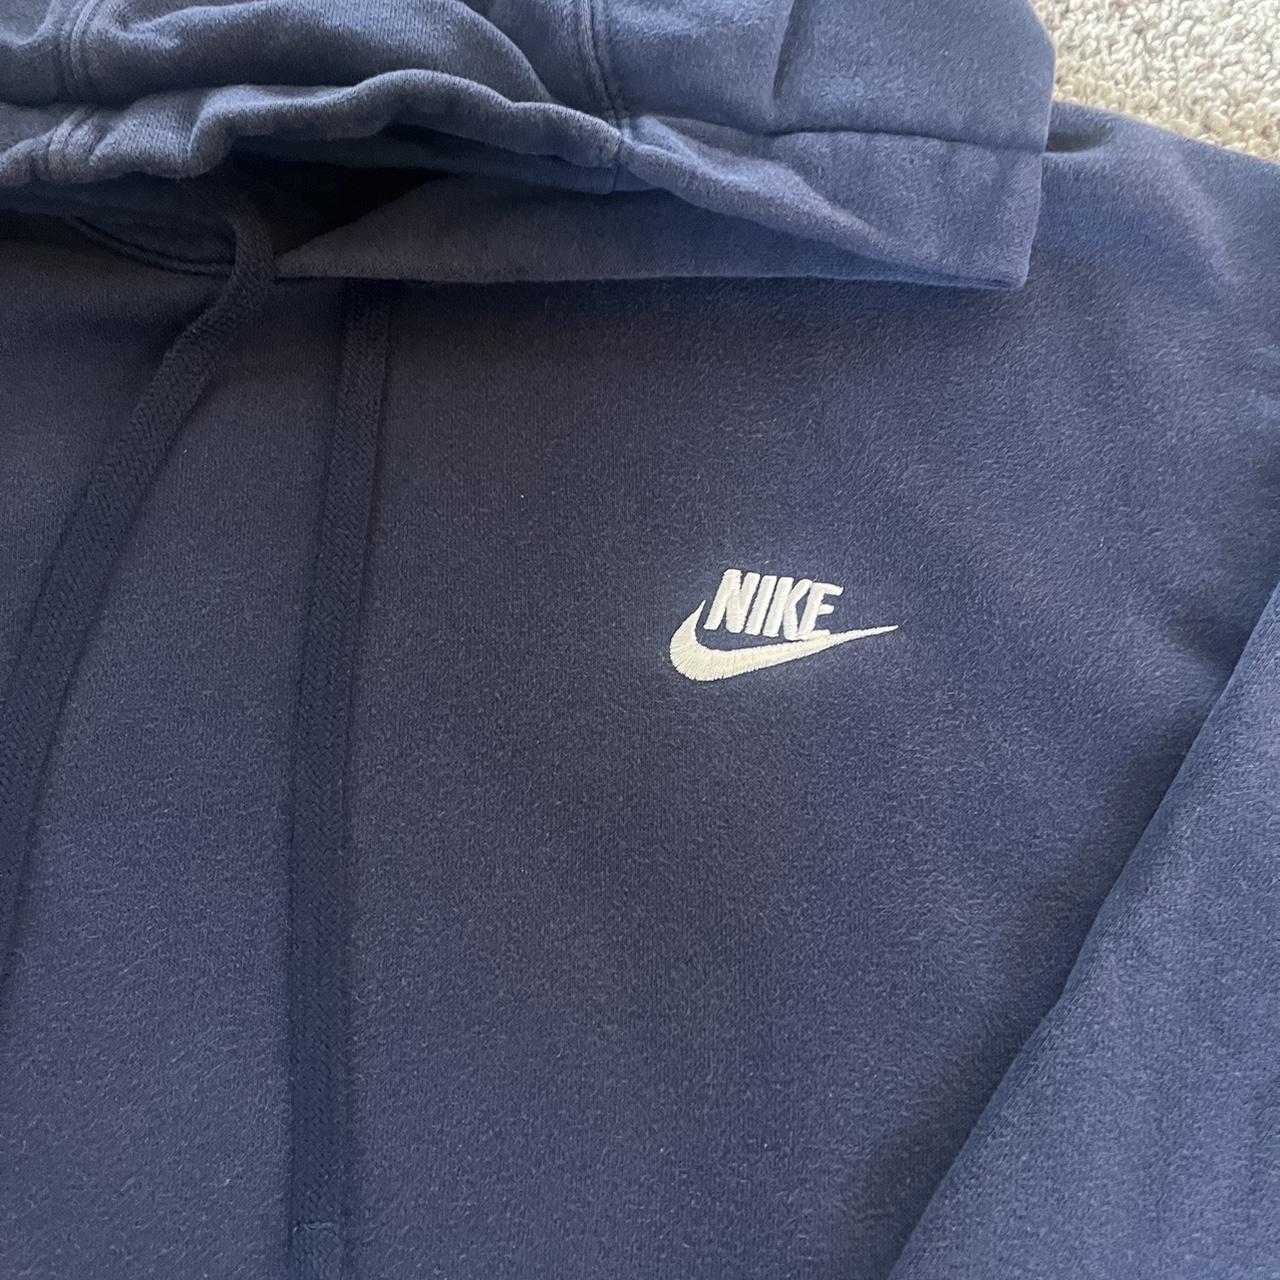 Navy Blue Nike Hoodie -thick -casual -fits a... - Depop